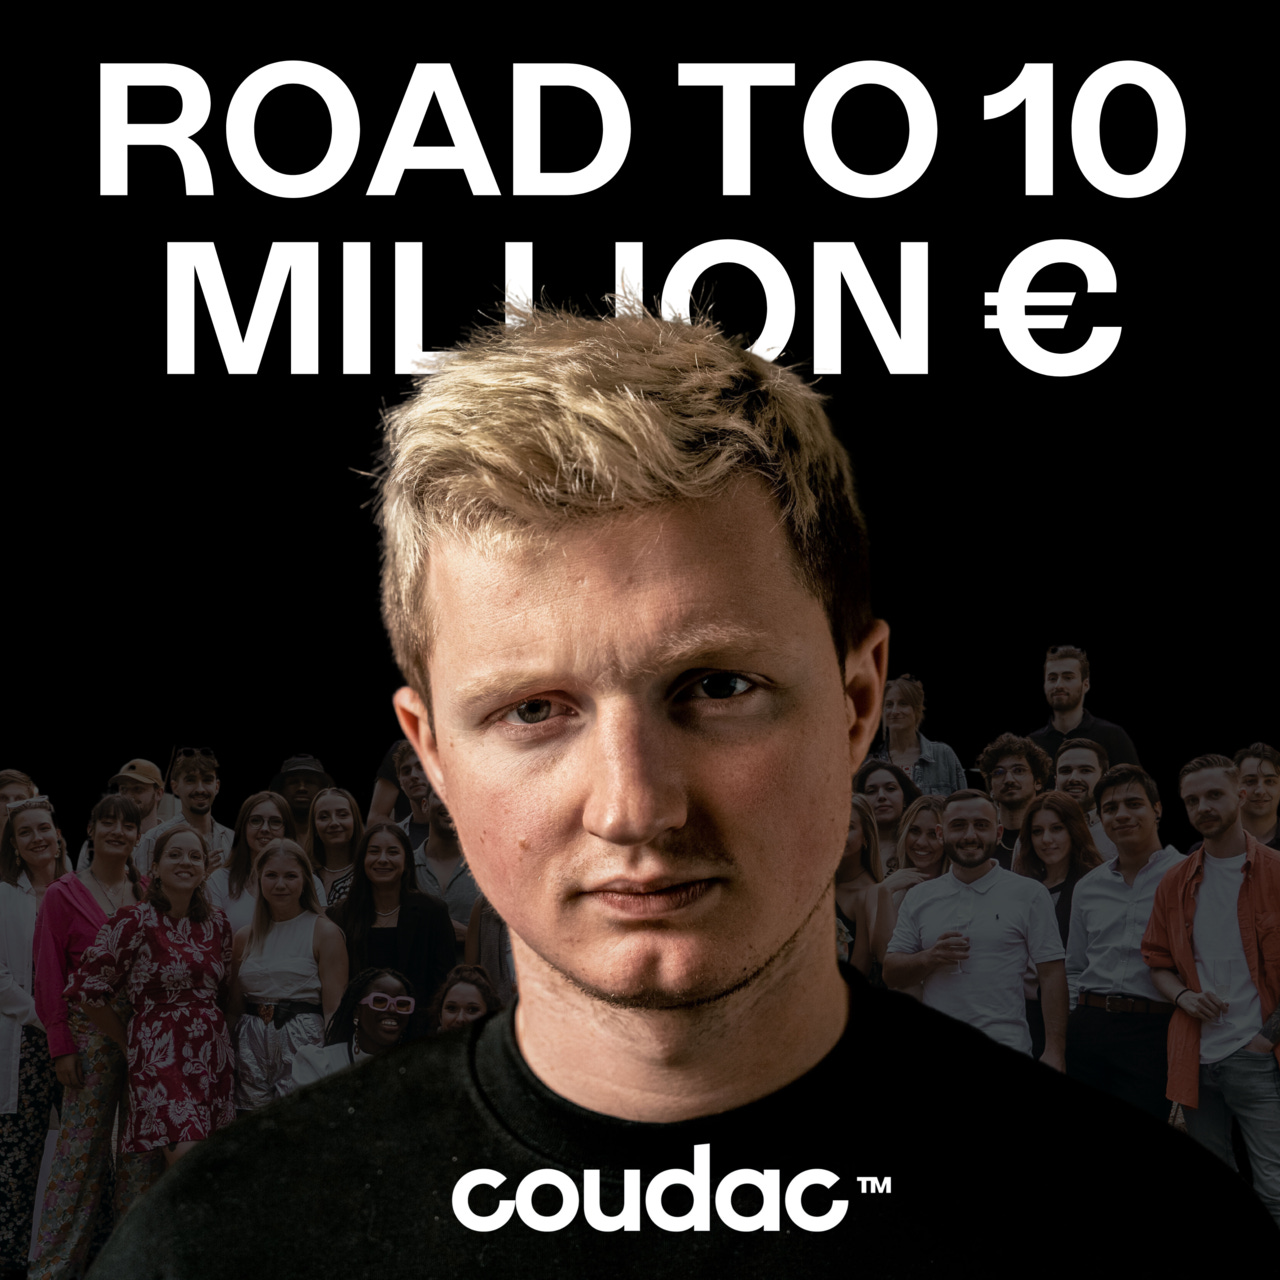 Road to 10 million - By Théo Lion (Coudac)